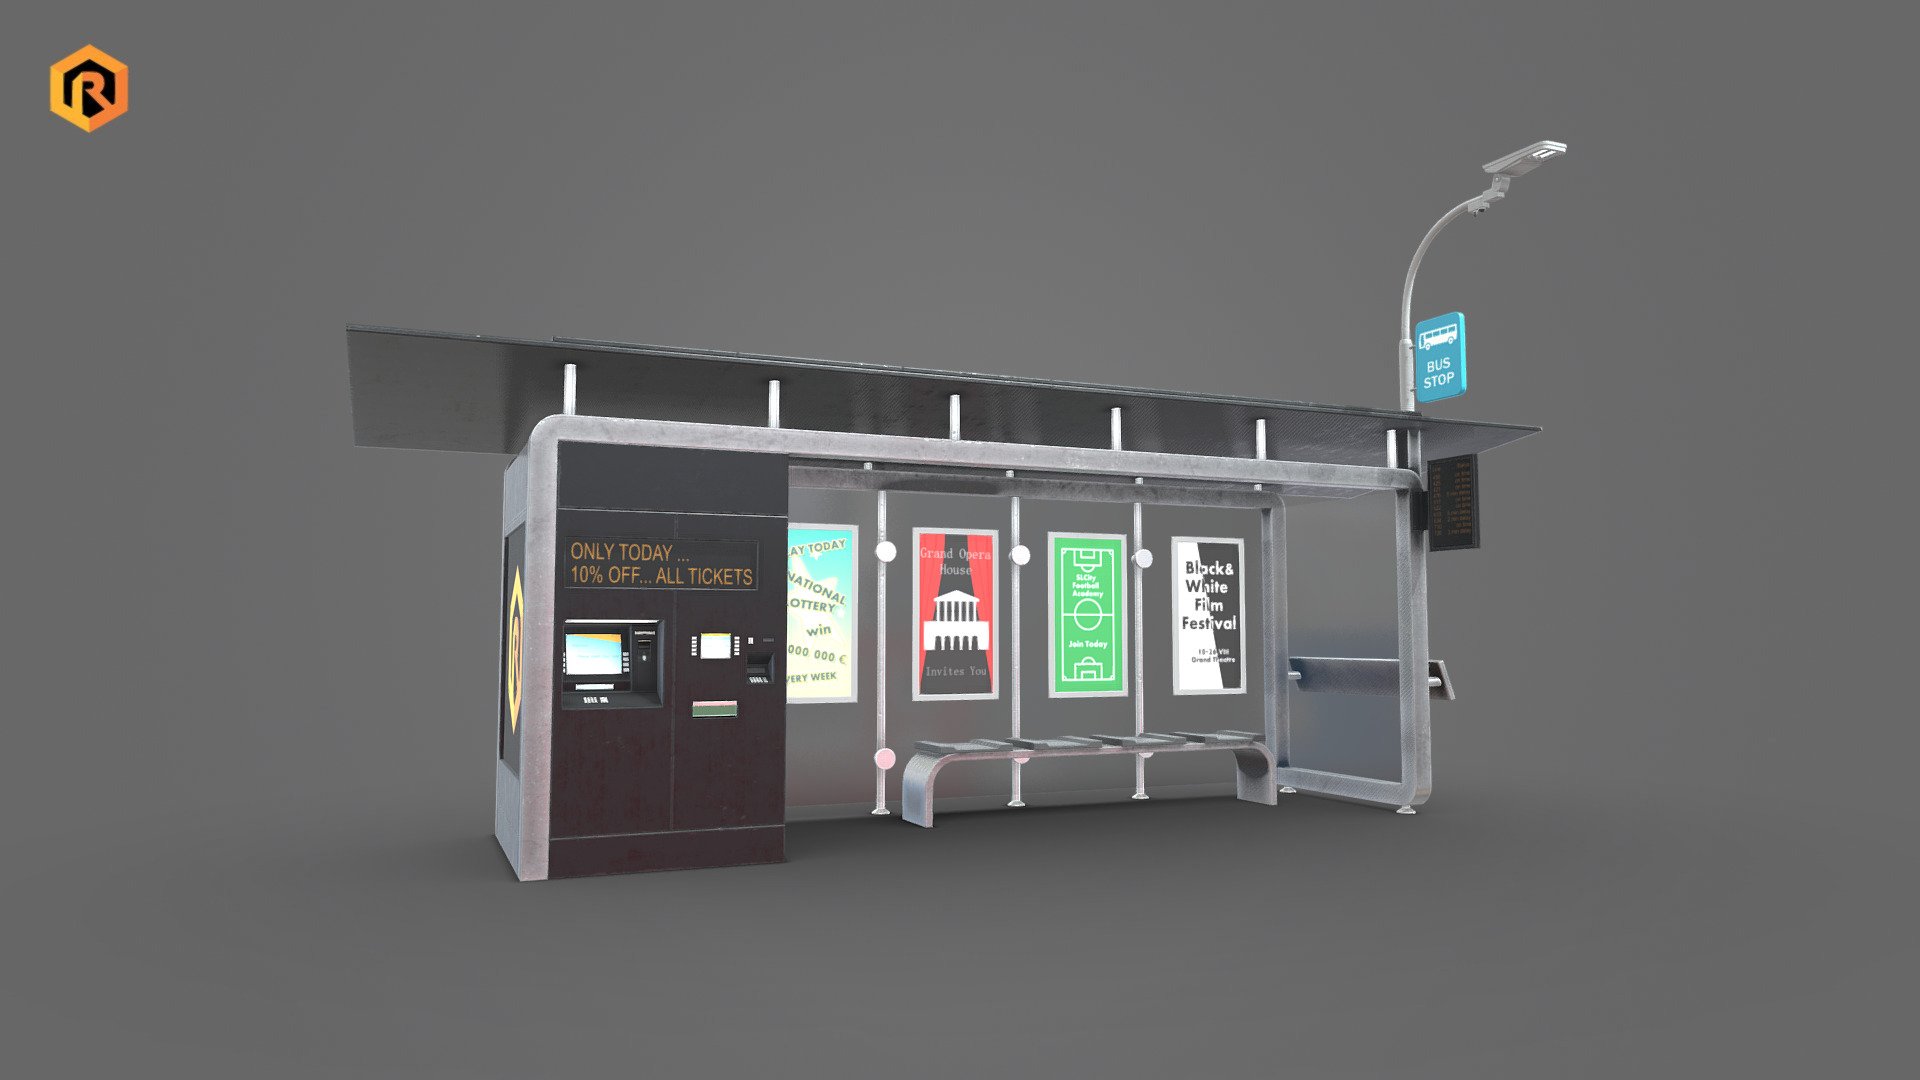 Low-poly PBR 3D model of Smart Bus Stop (or Smart Bus Shelter). Smart bus stops and shelters, in addition to improving the public transport experience for passengers, contribute to creating smarter and greener cities.

This 3d model is best for use in games and other real-time applications such as Unity or Unreal Engine.   

Technical details:




3 PBR textures sets (Main Body, Emission, and Glass)

7970 Triangles

Model is one mesh.

Model completely unwrapped

Lot of additional file formats included (Blender, Unity, Maya etc.)

PBR textures details:




4096 Main Body texture set (Albedo, Metallic, Smoothness, Normal, AO)

4096 Emission texture set (Albedo, Metallic, Smoothness, Normal)

2048 Glass texture set (Albedo, Metallic, Smoothness, Normal)

More file formats are available in additional zip file on product page.  

Please feel free to contact me if you have any questions or need any support for this asset.

Support e-mail: support@rescue3d.com - Smart Bus Stop - Buy Royalty Free 3D model by Rescue3D Assets (@rescue3d) 3d model